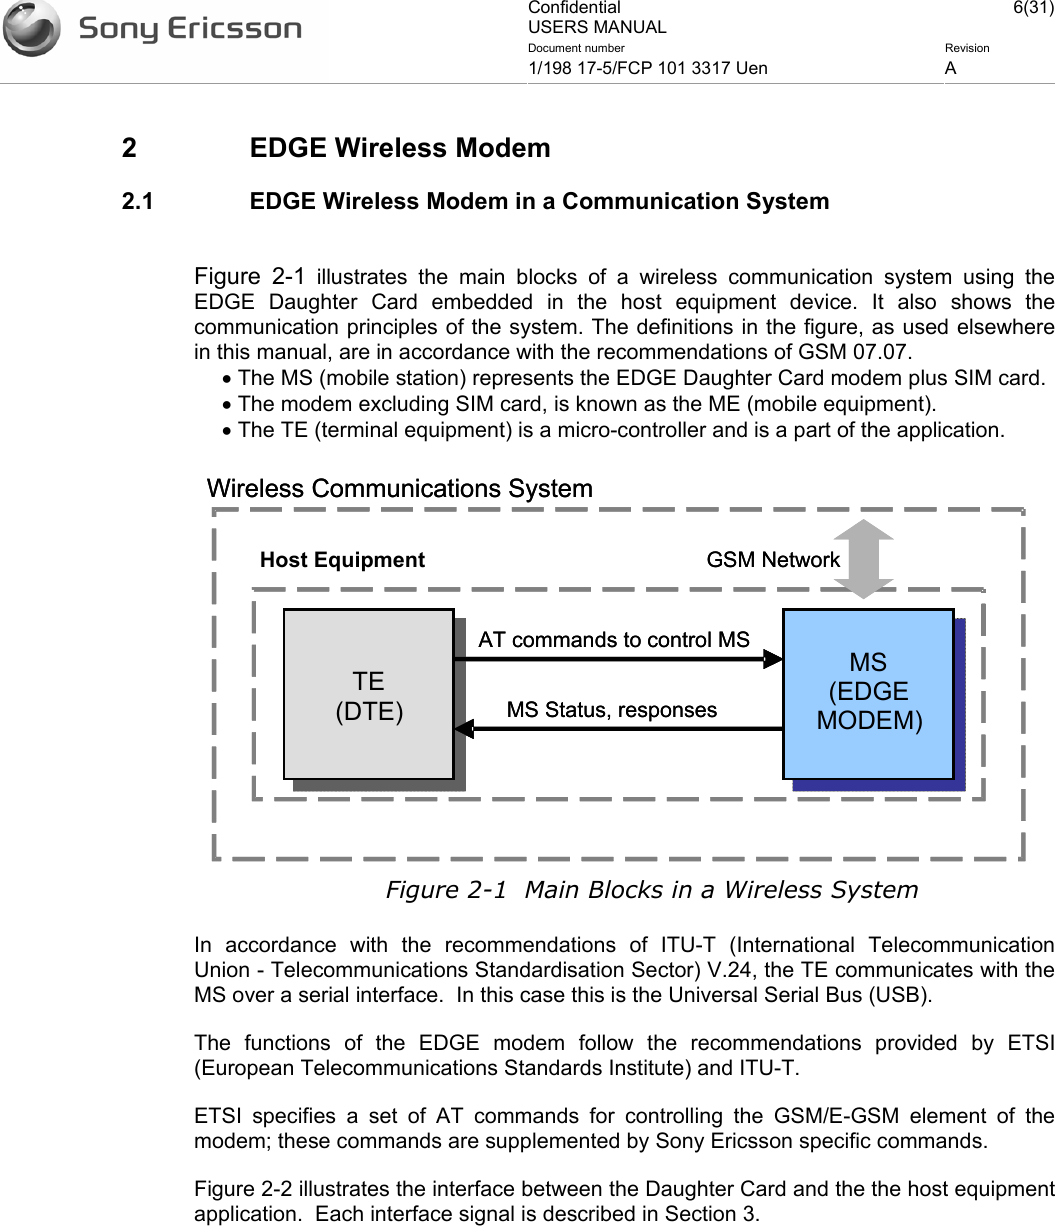 Confidential USERS MANUAL 6(31)Document number  Revision 1/198 17-5/FCP 101 3317 Uen  A    2  EDGE Wireless Modem 2.1  EDGE Wireless Modem in a Communication System  Figure 2-1 illustrates the main blocks of a wireless communication system using the EDGE Daughter Card embedded in the host equipment device. It also shows the communication principles of the system. The definitions in the figure, as used elsewhere in this manual, are in accordance with the recommendations of GSM 07.07. • The MS (mobile station) represents the EDGE Daughter Card modem plus SIM card.  • The modem excluding SIM card, is known as the ME (mobile equipment). • The TE (terminal equipment) is a micro-controller and is a part of the application.  Figure 2-1  Main Blocks in a Wireless System In accordance with the recommendations of ITU-T (International Telecommunication Union - Telecommunications Standardisation Sector) V.24, the TE communicates with the MS over a serial interface.  In this case this is the Universal Serial Bus (USB). The functions of the EDGE modem follow the recommendations provided by ETSI (European Telecommunications Standards Institute) and ITU-T. ETSI specifies a set of AT commands for controlling the GSM/E-GSM element of the modem; these commands are supplemented by Sony Ericsson specific commands. Figure 2-2 illustrates the interface between the Daughter Card and the the host equipment application.  Each interface signal is described in Section 3.   MS (EDGE MODEM)TE (DTE)GSM Network MS Status, responsesAT commands to control MSHost EquipmentWireless Communications SystemMS (EDGE MODEM)TE (DTE)GSM Network MS Status, responsesAT commands to control MS Wireless Communications System